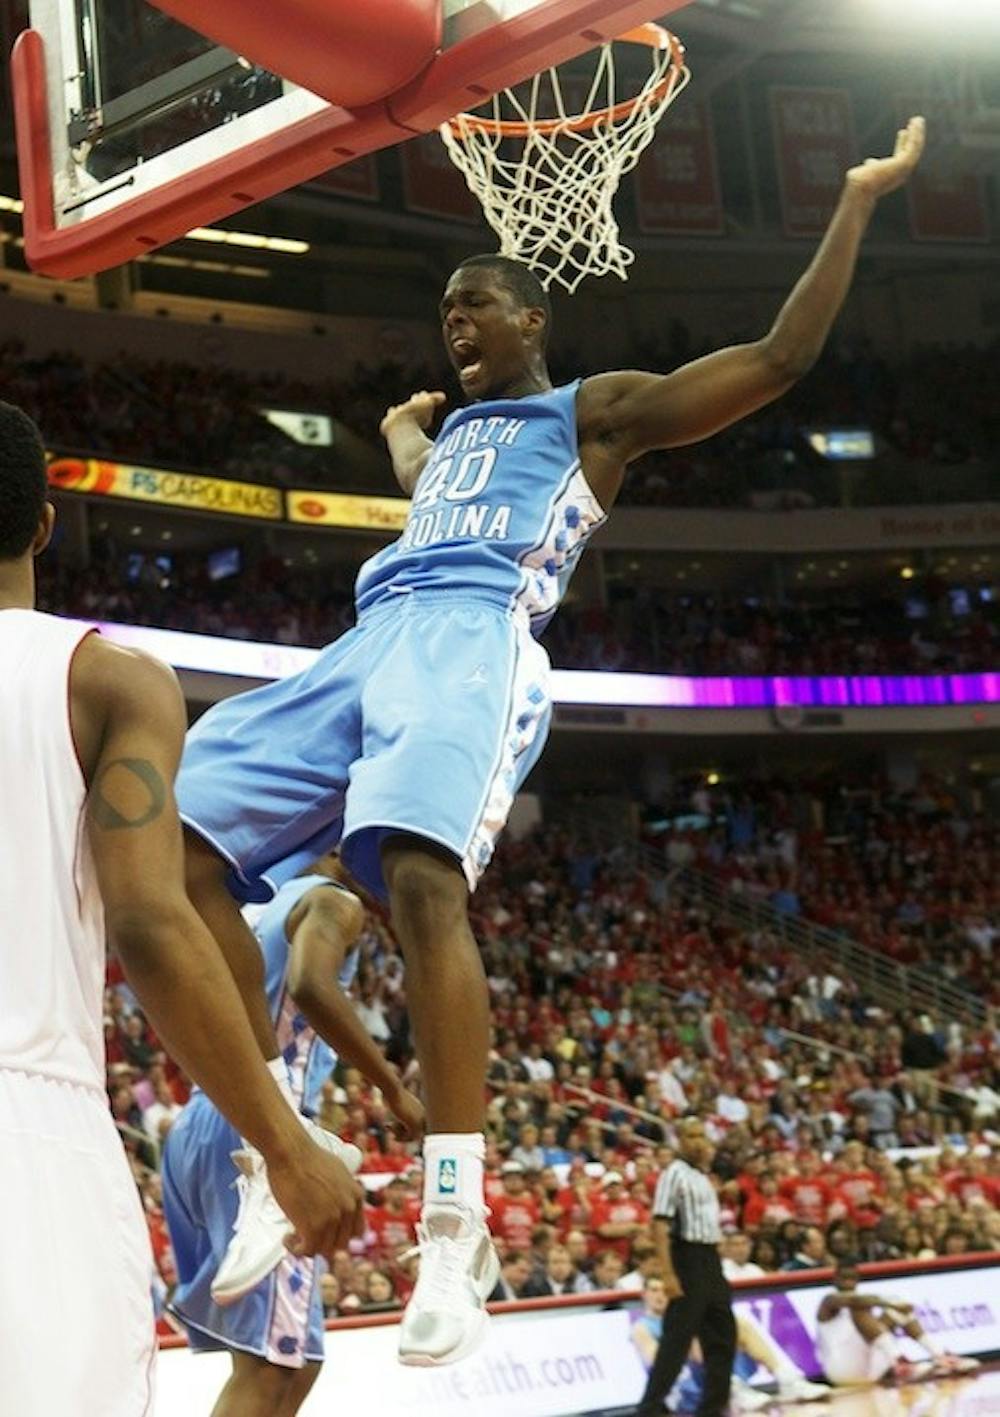 Harrison Barnes dunks late in the second half of the Tar Heels' 75-63 win over the Wolfpack.